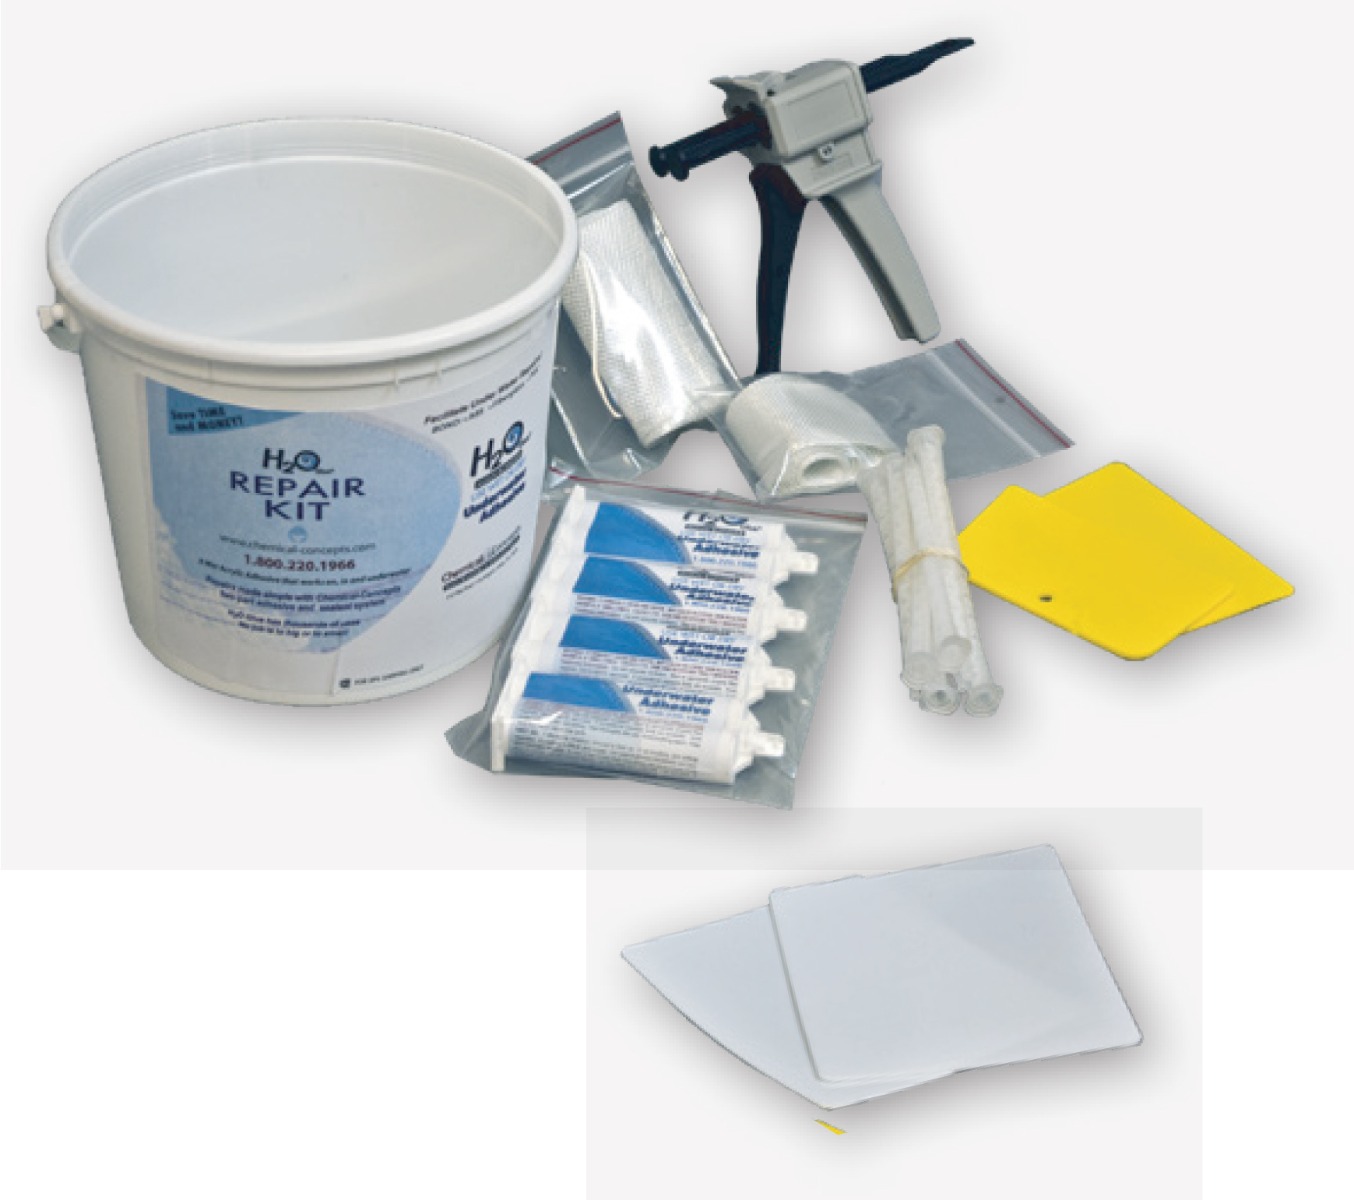 Binding Resin Structural Fiberglass Repair Kit Acrylic Plastic ABS & More -  Multi-Tech Products